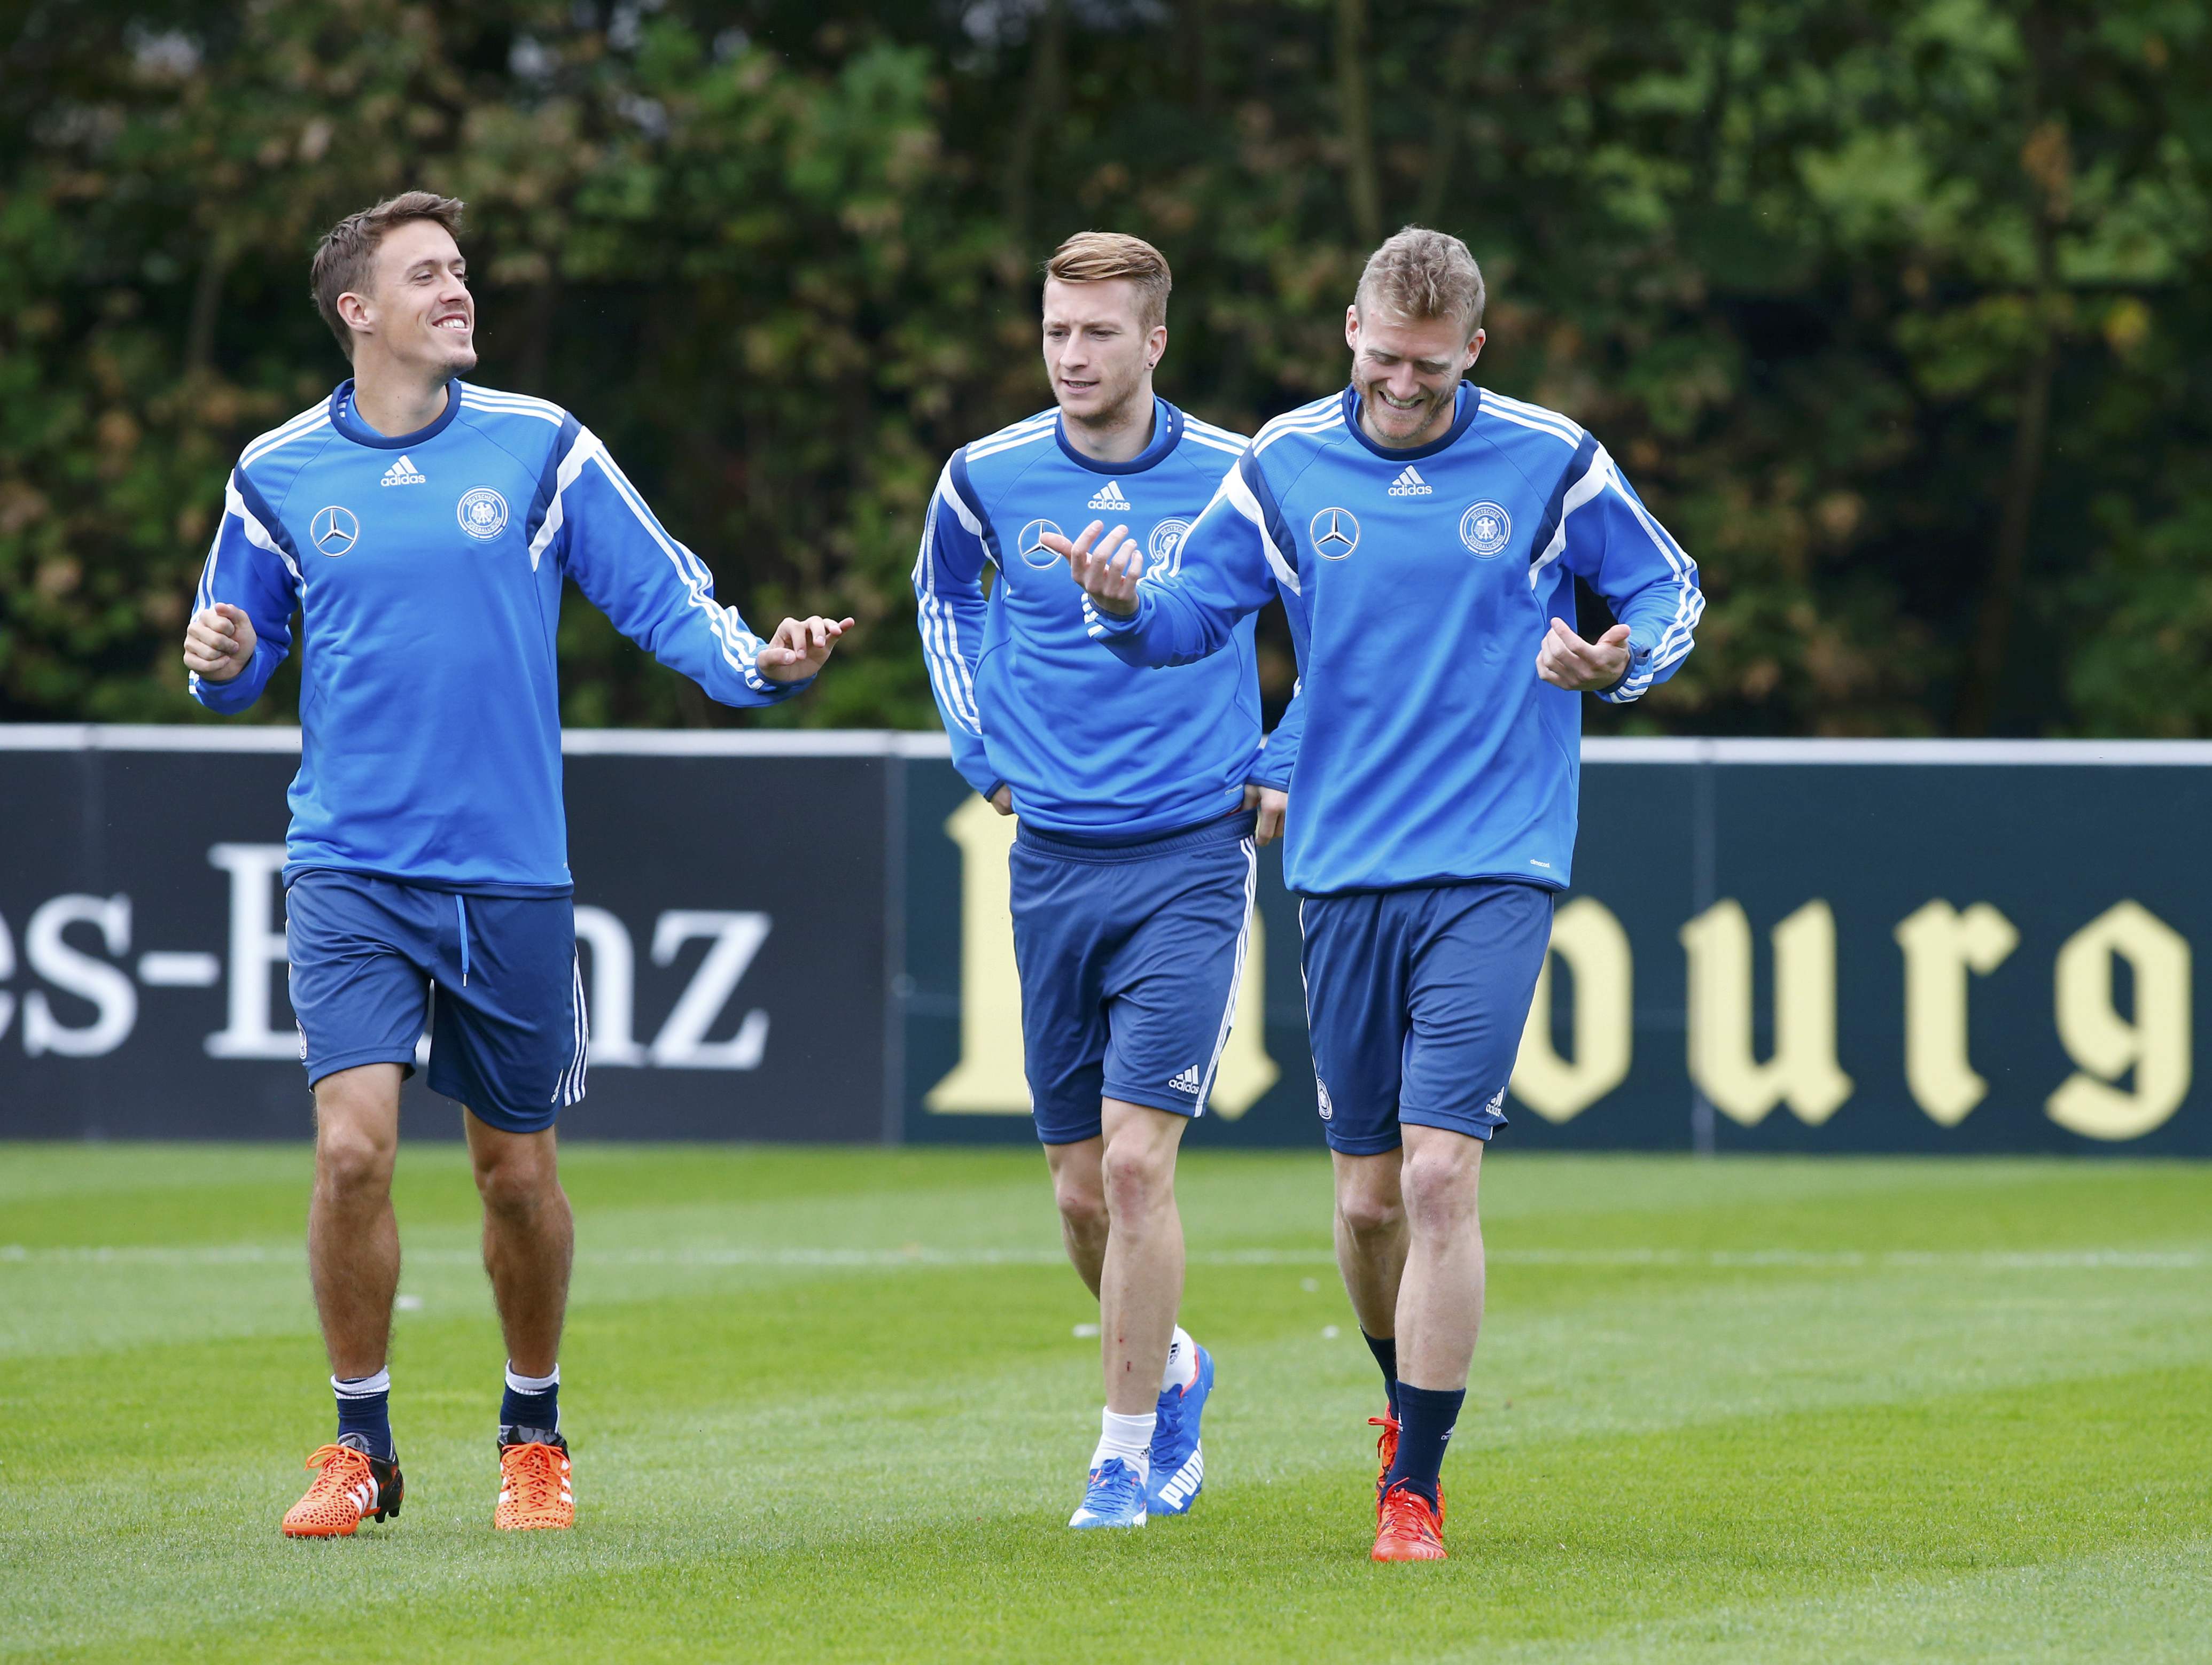 Germany national soccer players Max Kruse, Marco Reus and Andre Schuerrle (L-R) take part in a training session in Frankfurt, Germany, October 6, 2015. Germany will play a Euro 2016 qualification match against Ireland on Thursday.  REUTERS/Ralph Orlowski